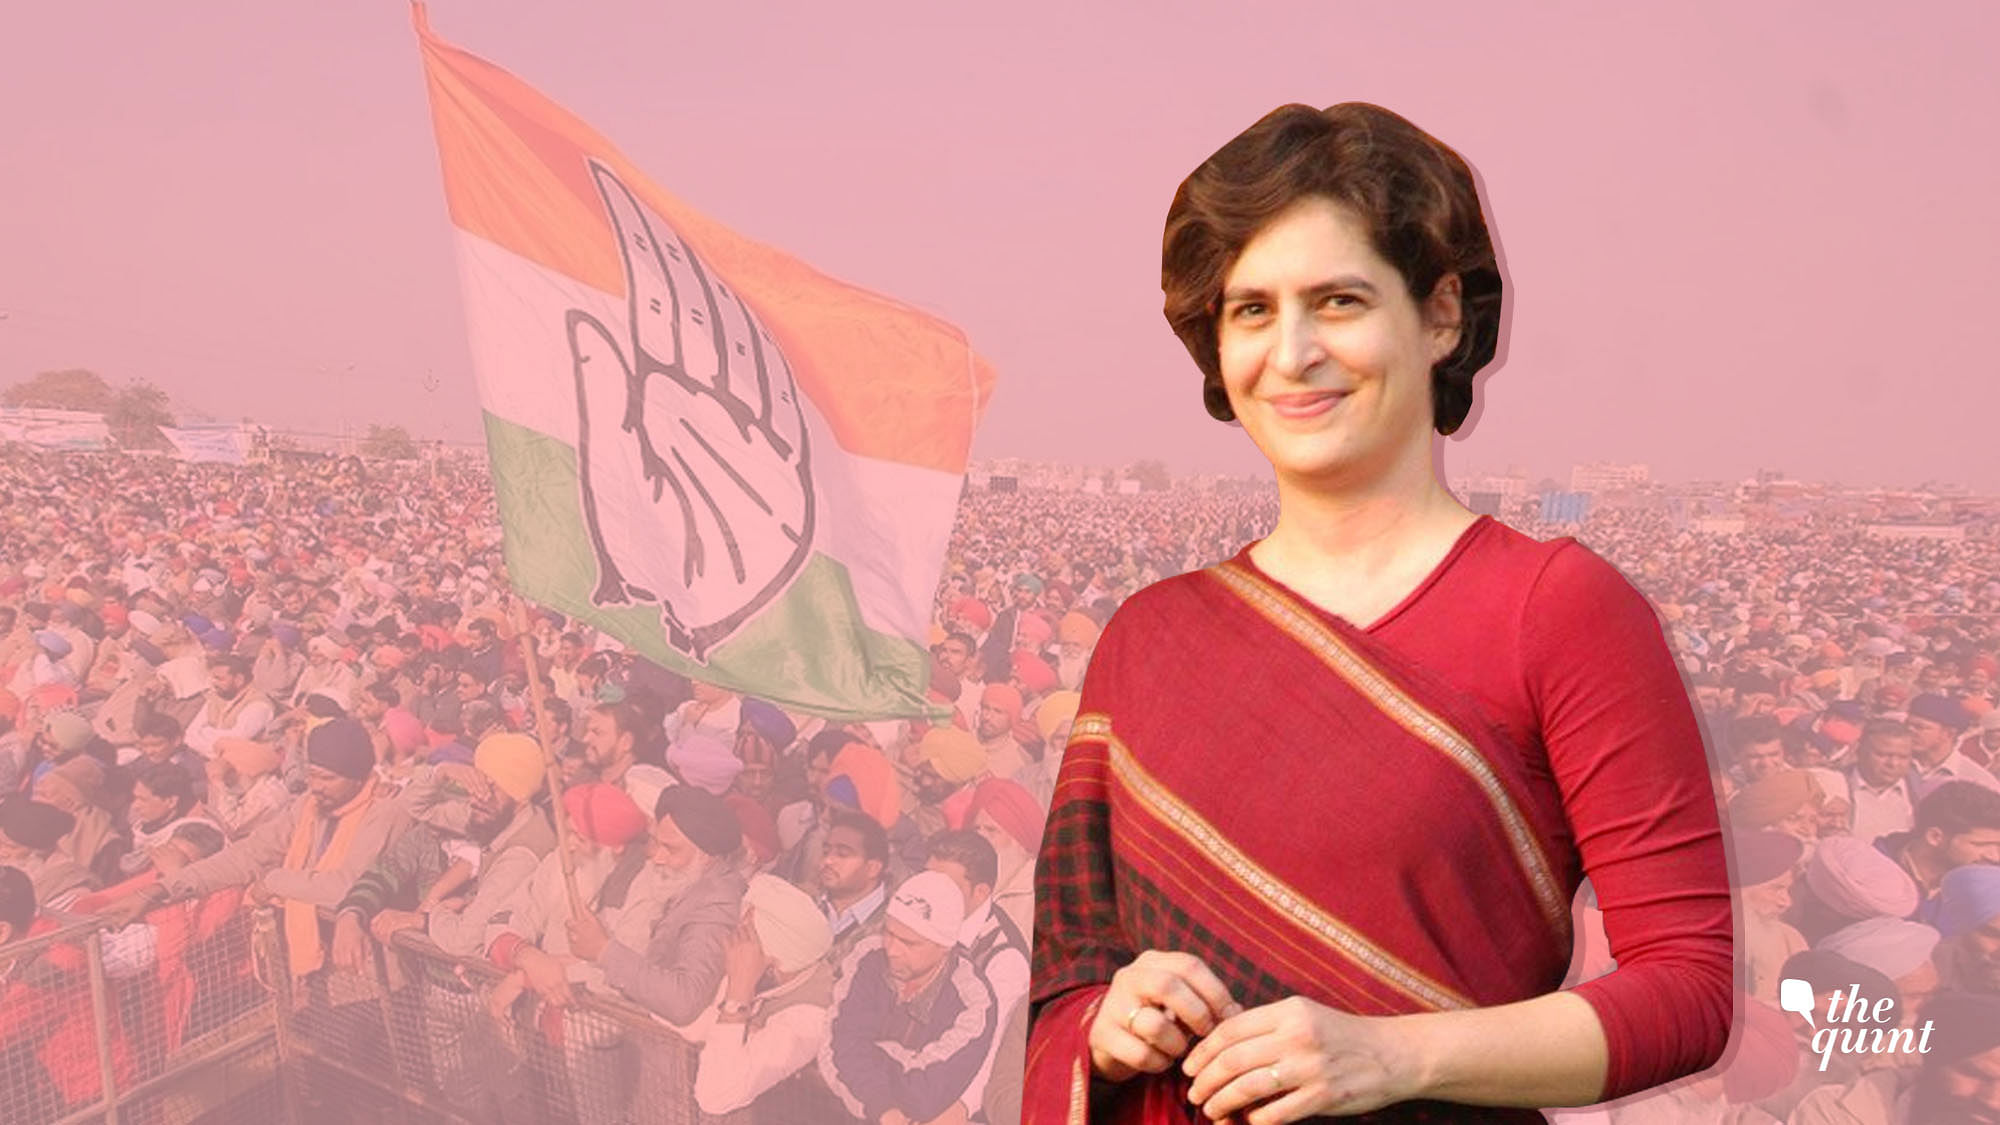 At this moment, Priyanka Gandhi’s biggest asset is the freshness of her start.